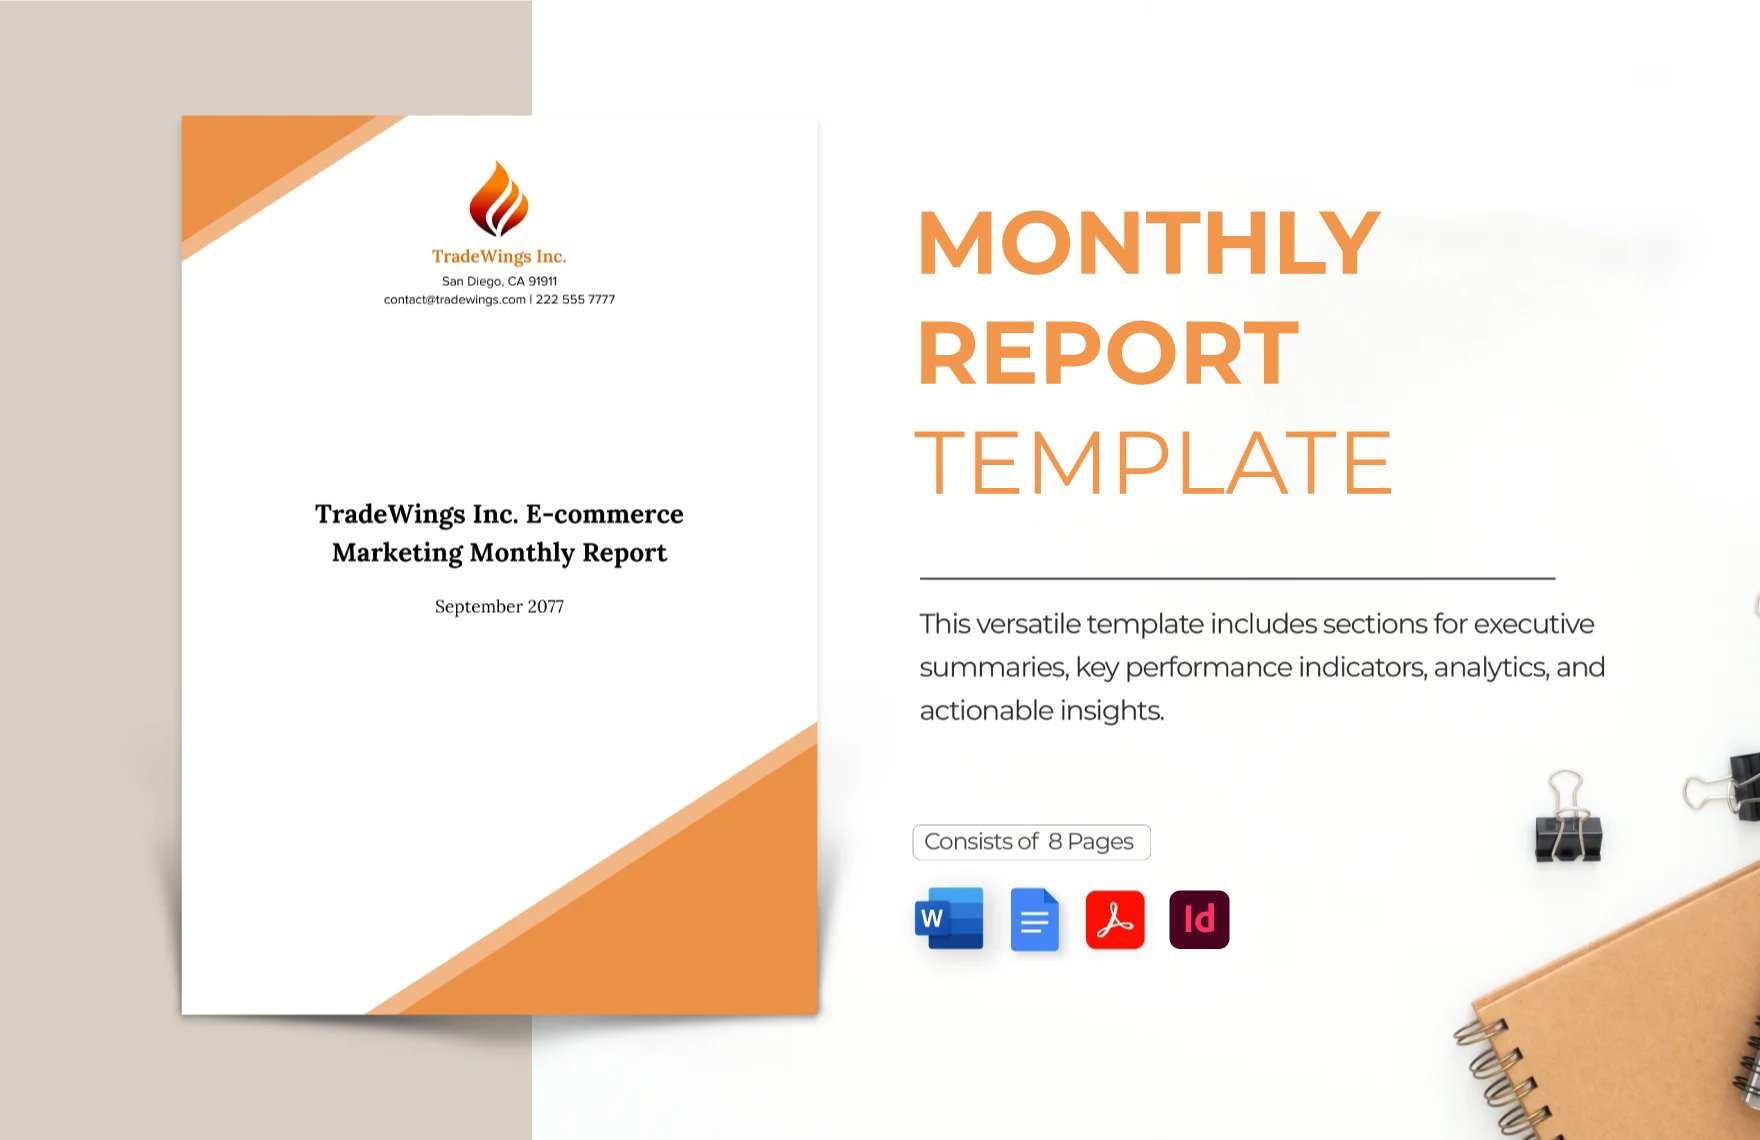 Monthly Report Template in Word, Google Docs, PDF, InDesign